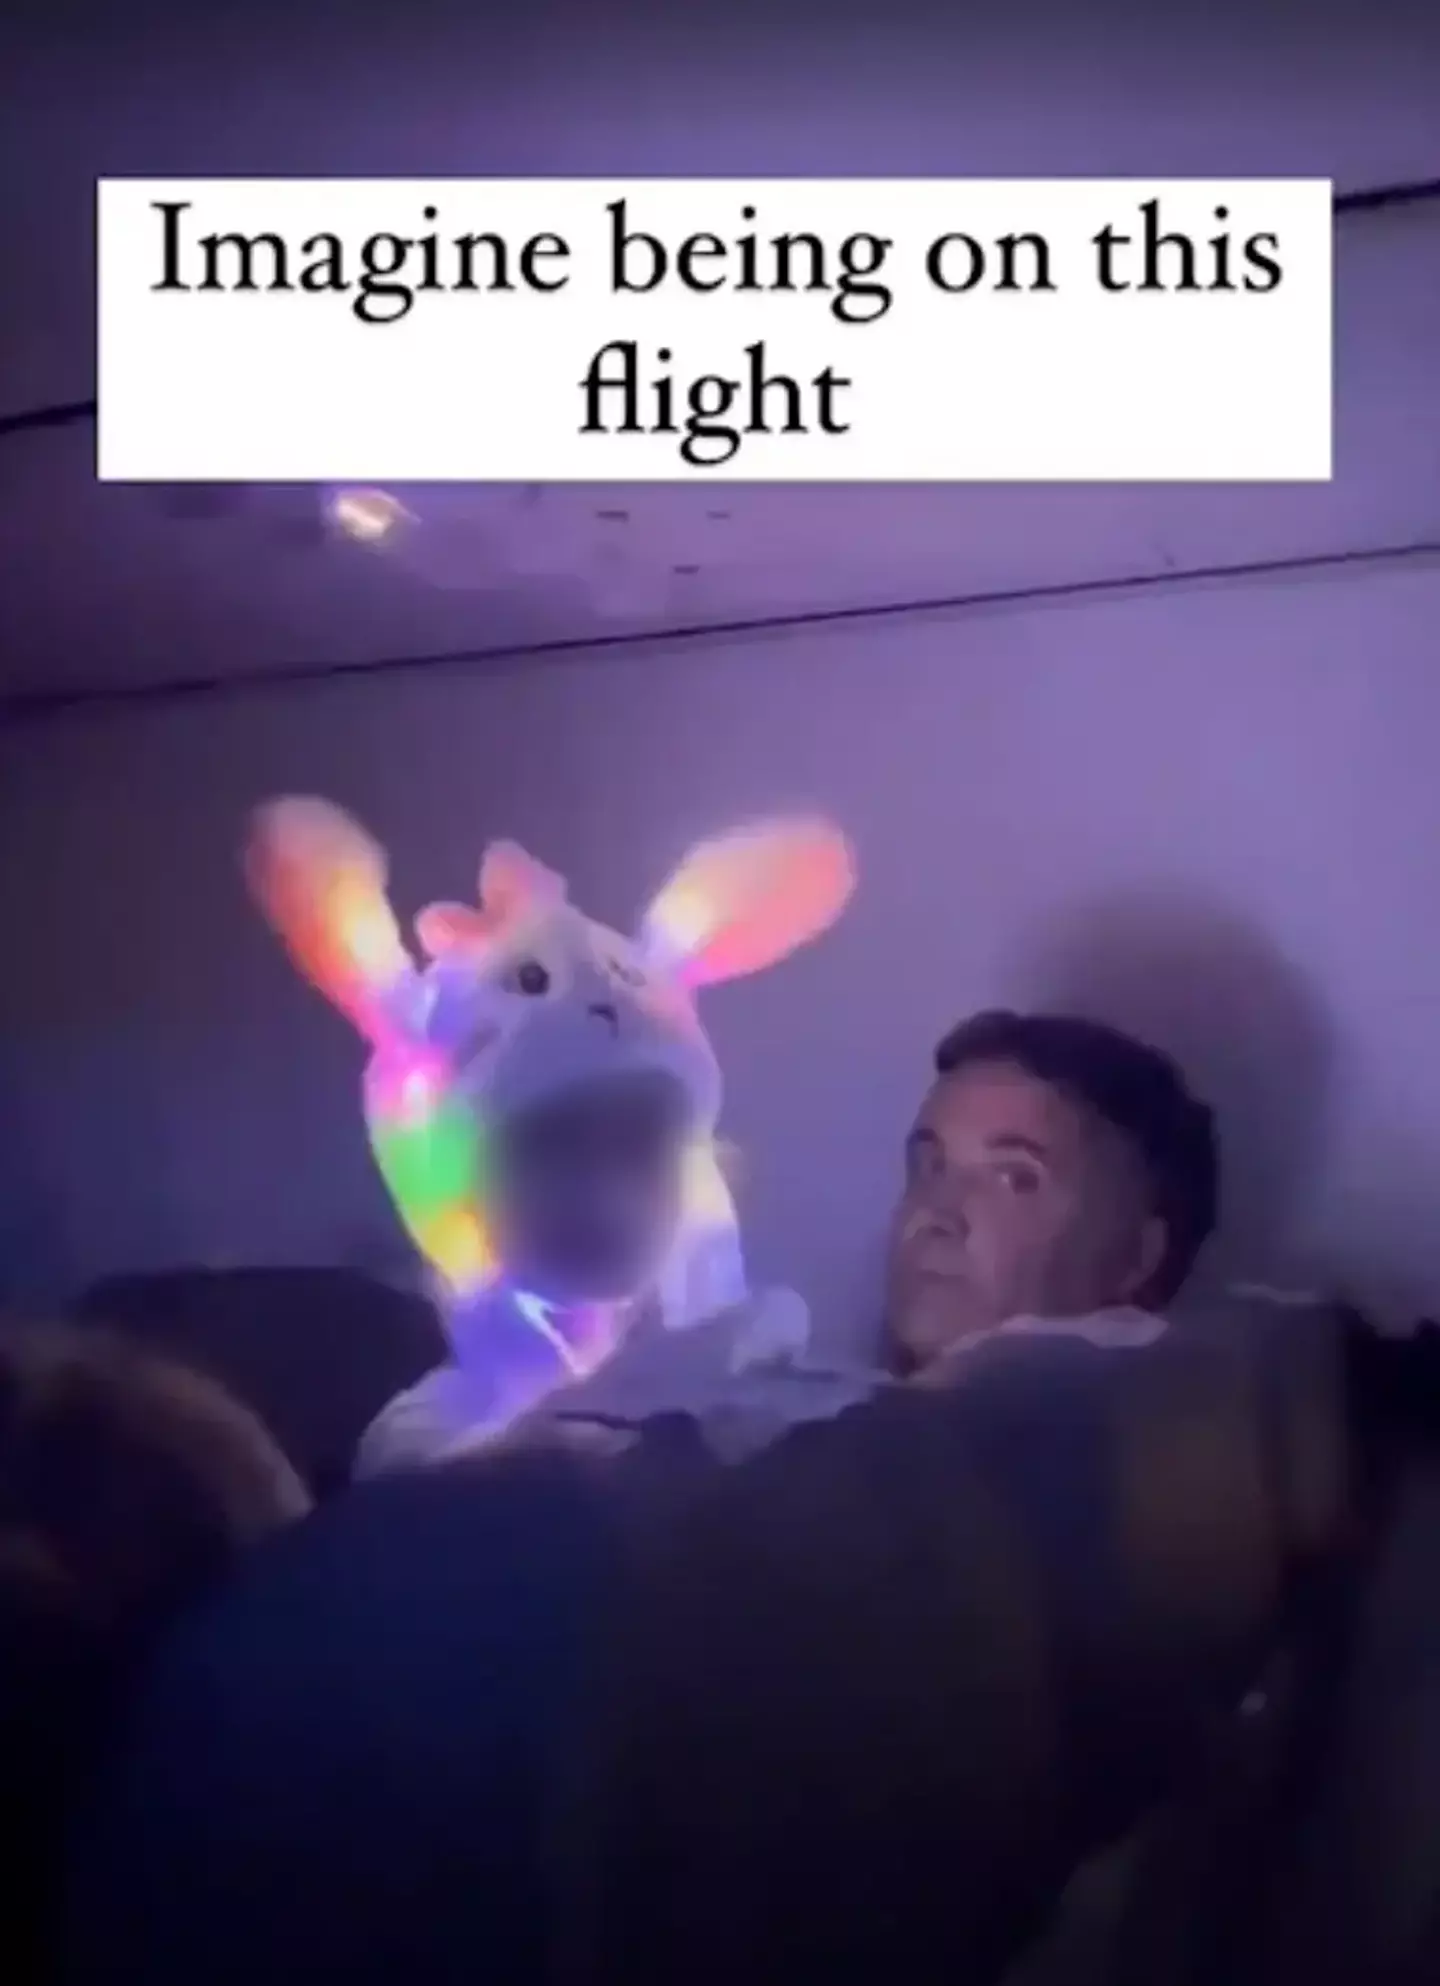 The child was wearing a bright outfit on the flight.